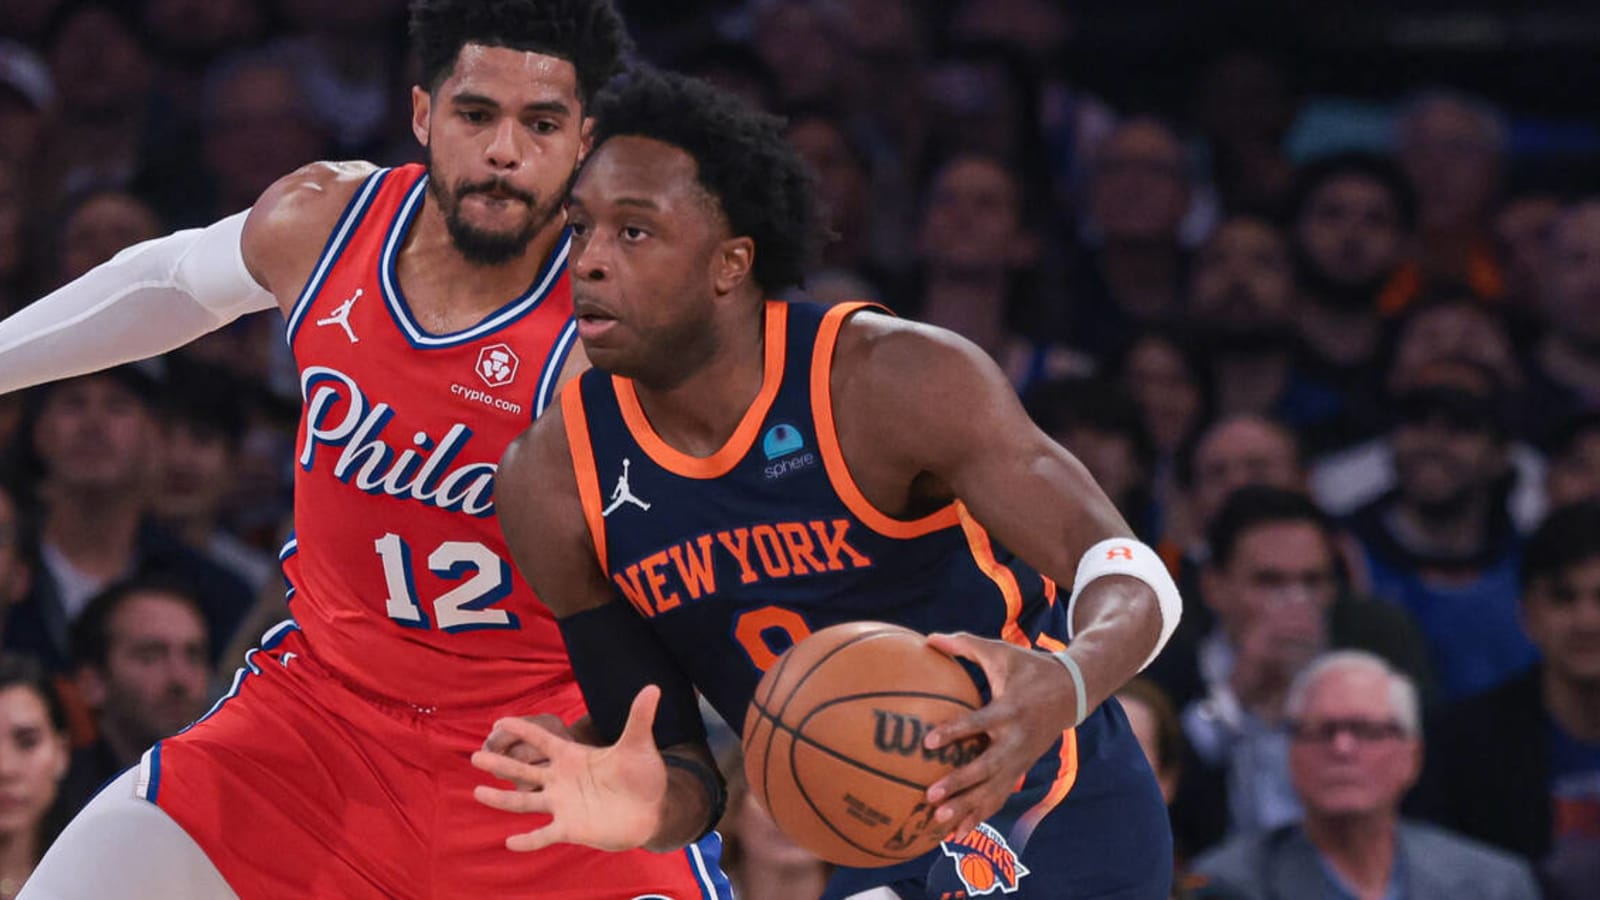 Watch: Knicks get aggressive on defense in Game 5 loss